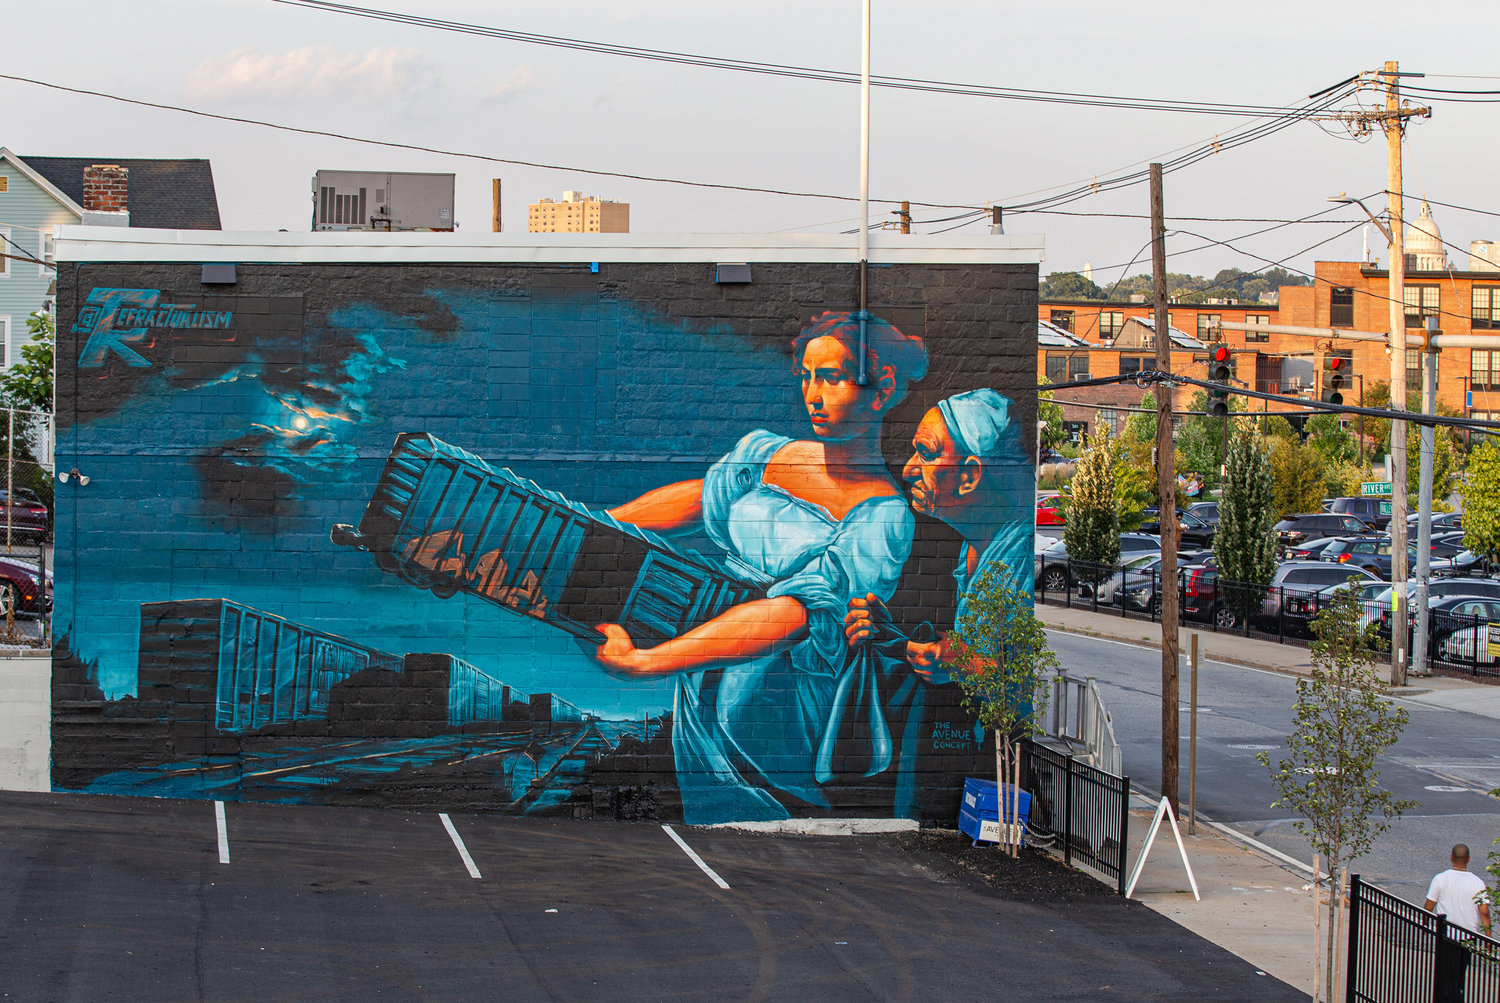 “Derailed”, a mural by Connecticut-based artist Mike DeAngelo, can be found at 422 Valley Street